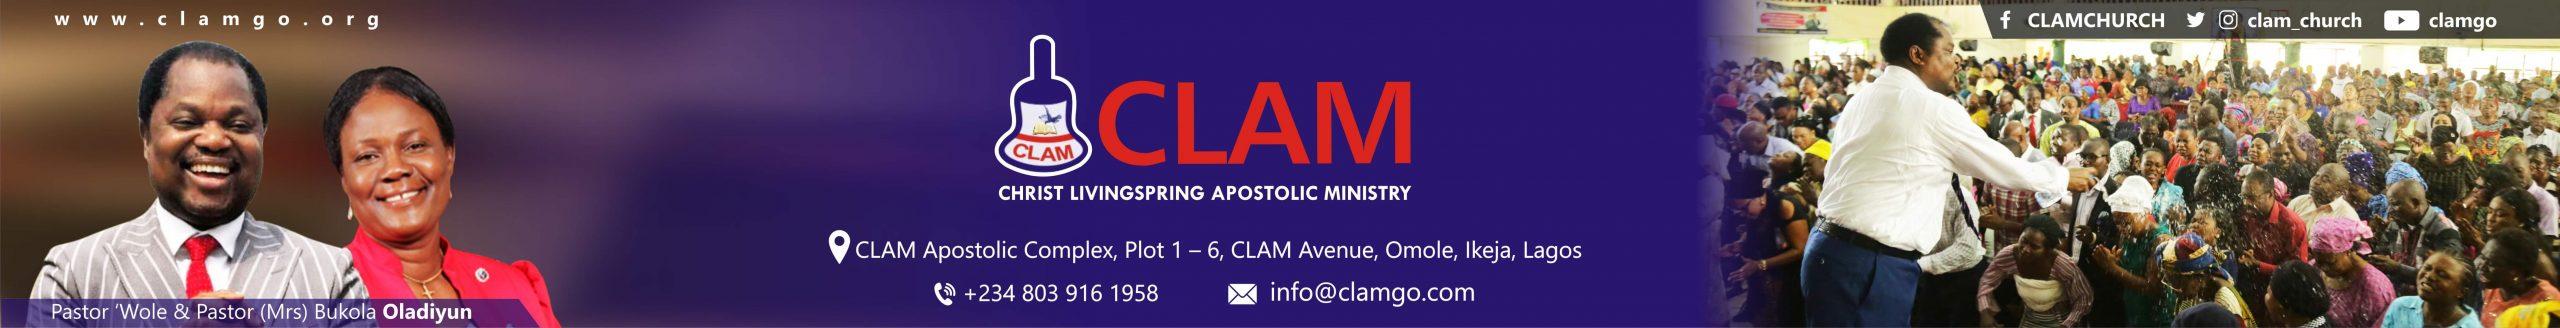 CLAM Banner Ad